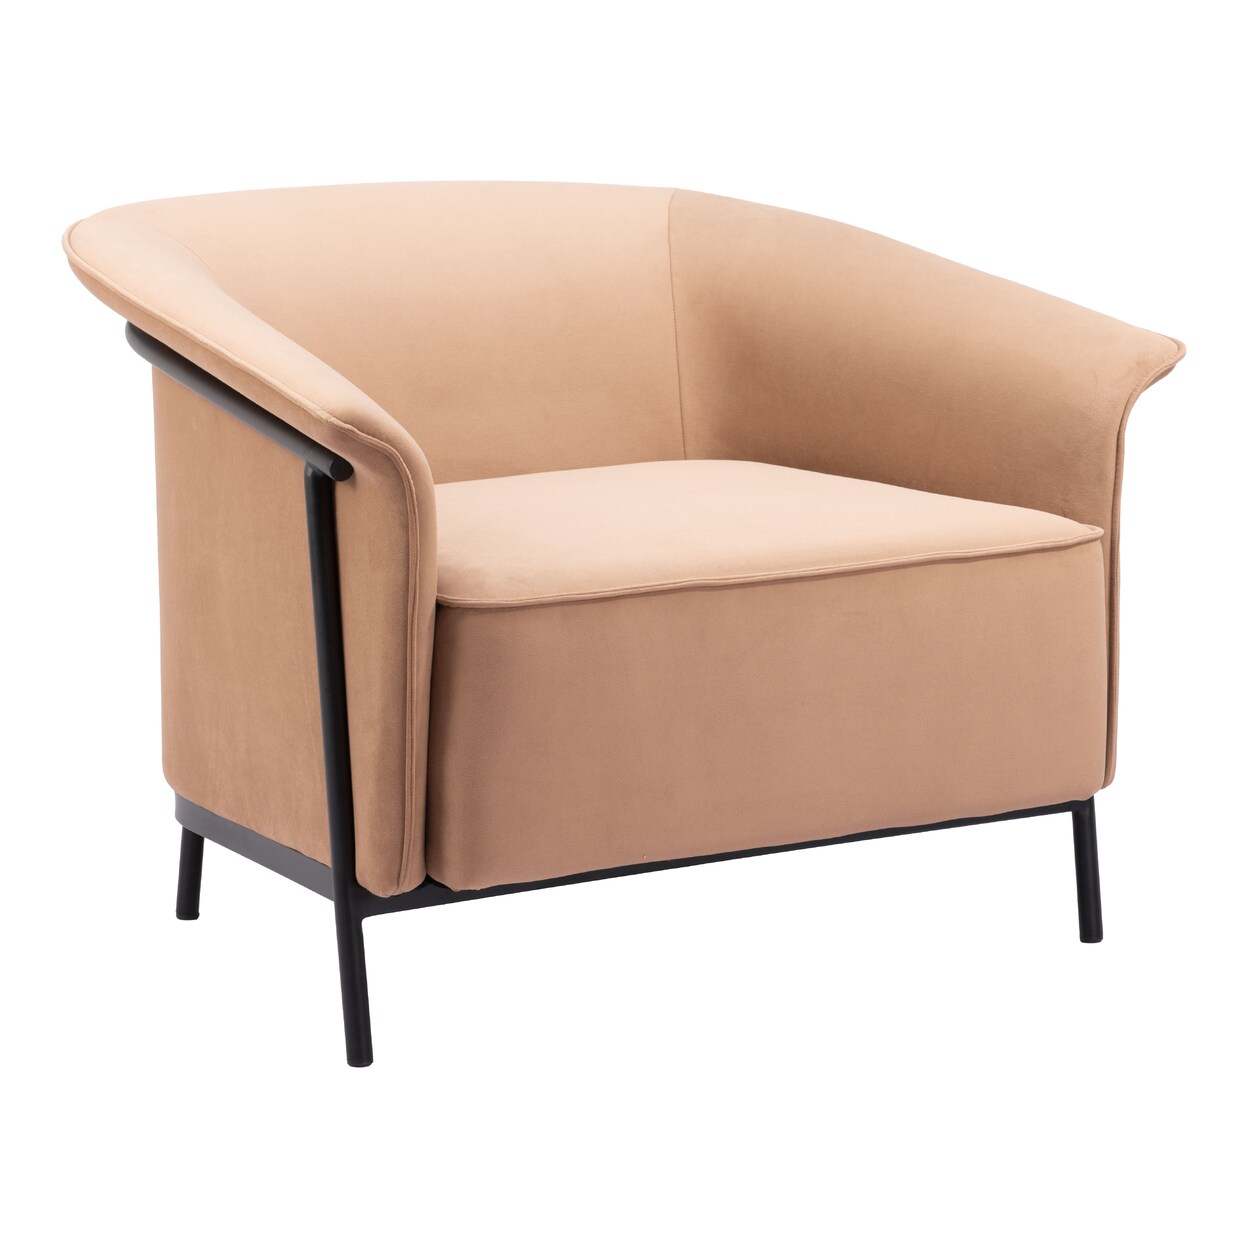 Zuo Modern Contemporary Inc. Burry Accent Chair Tan